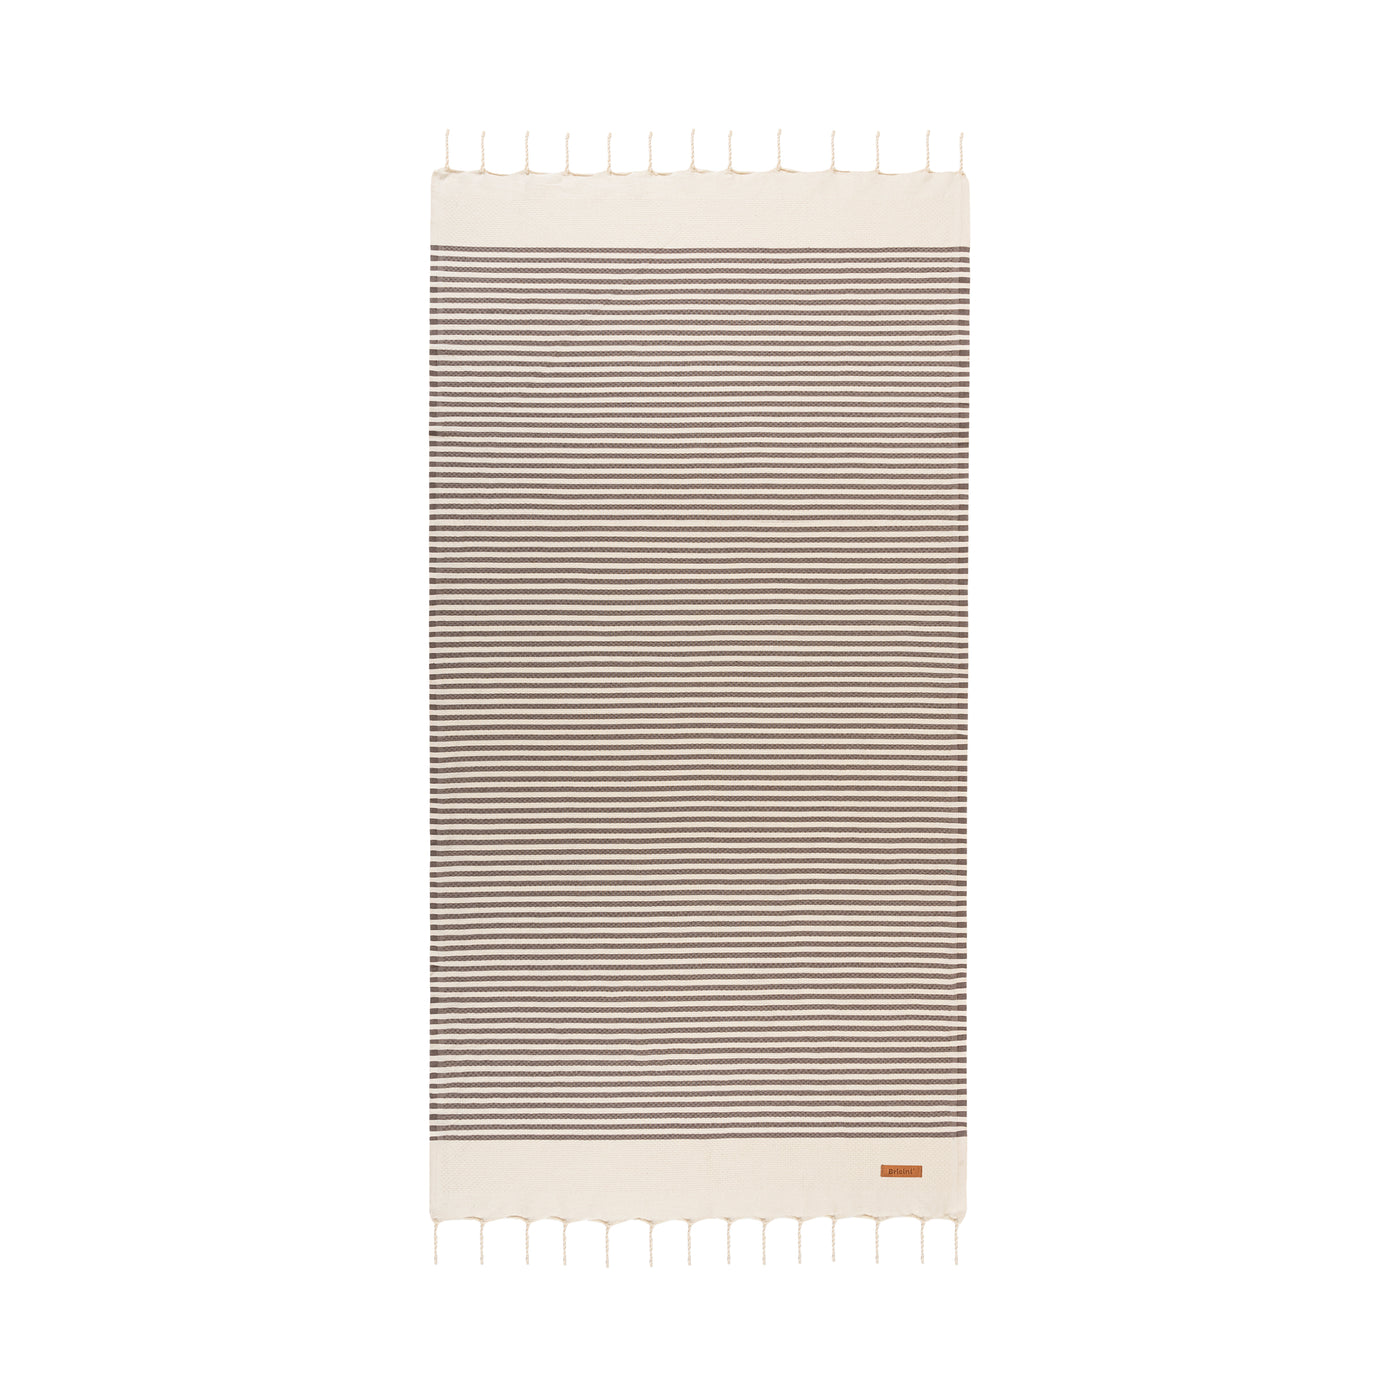 Rubby Taupe Towel